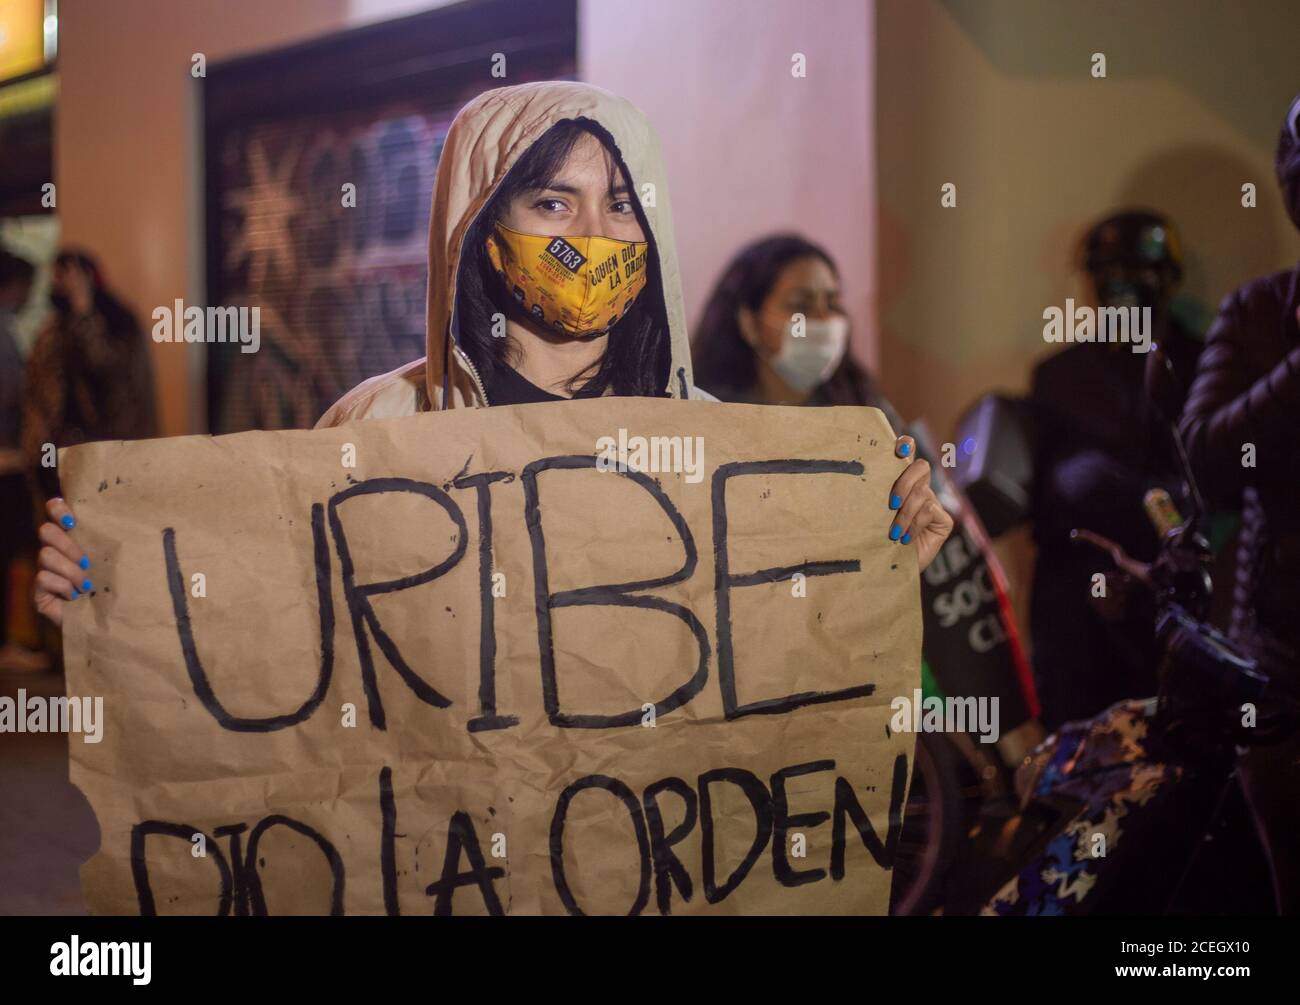 An opposition person holds a sign that says 'Uribe gave the order,' celebrating the court's ruling against former President Álvaro Uribe. Stock Photo